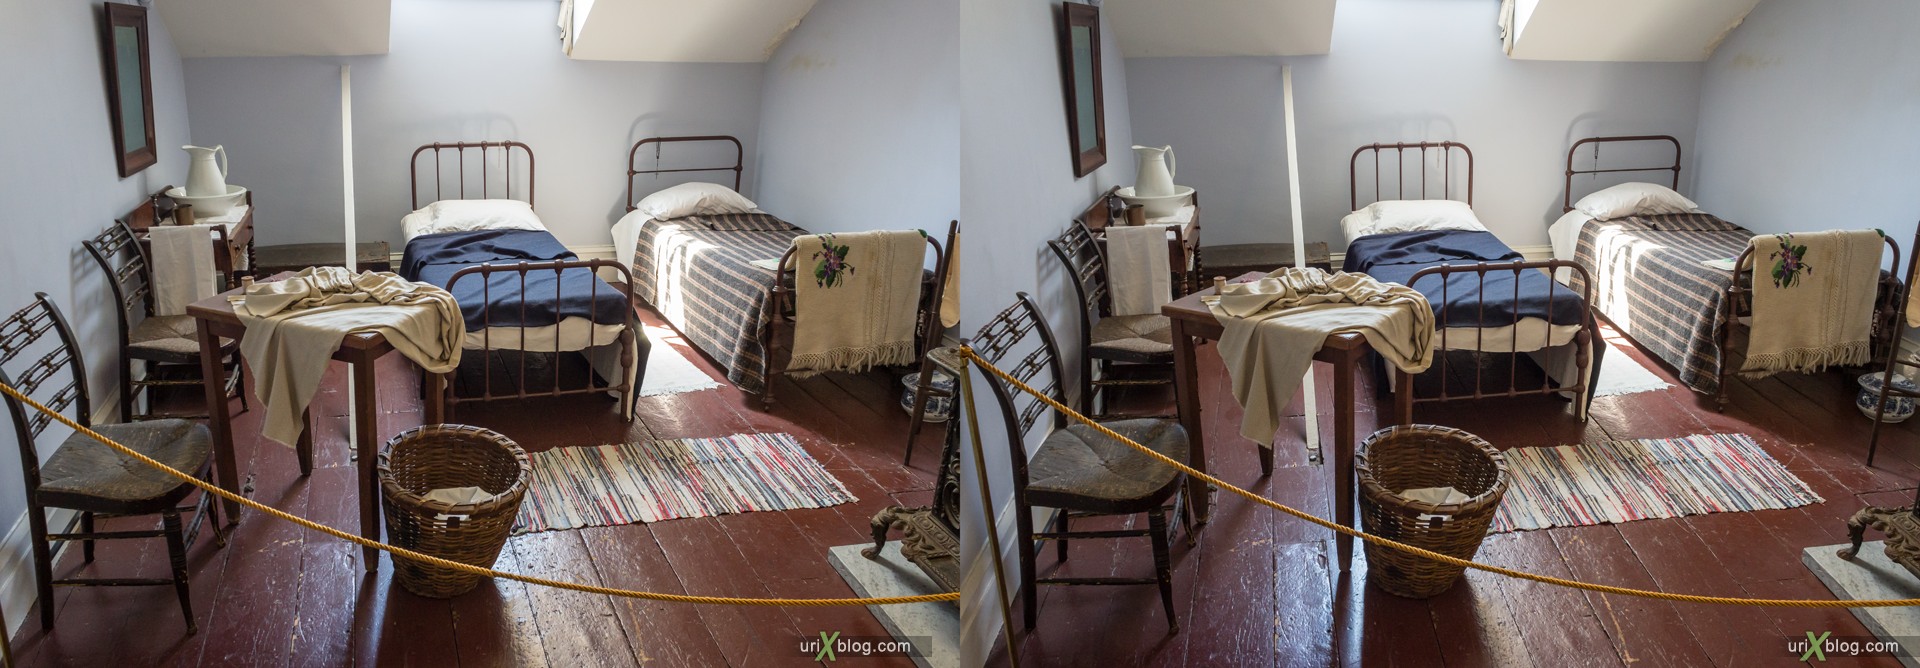 2013, Merchant's House Museum, NYC, New York City, USA, 3D, stereo pair, cross-eyed, crossview, cross view stereo pair, stereoscopic